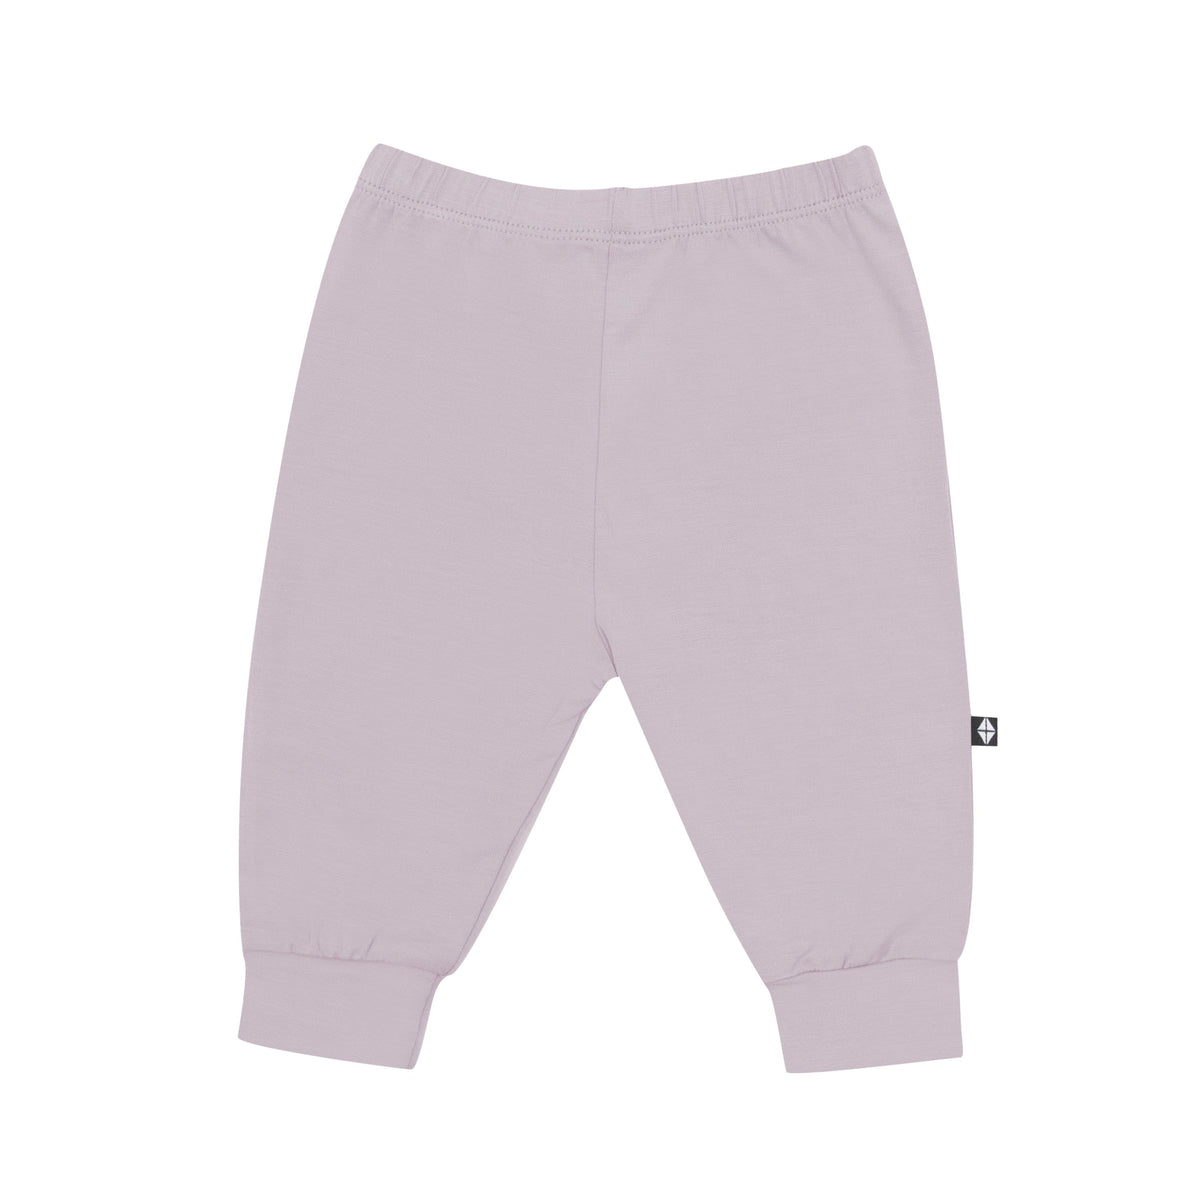 Kyte Baby Pants Pant in Wisteria